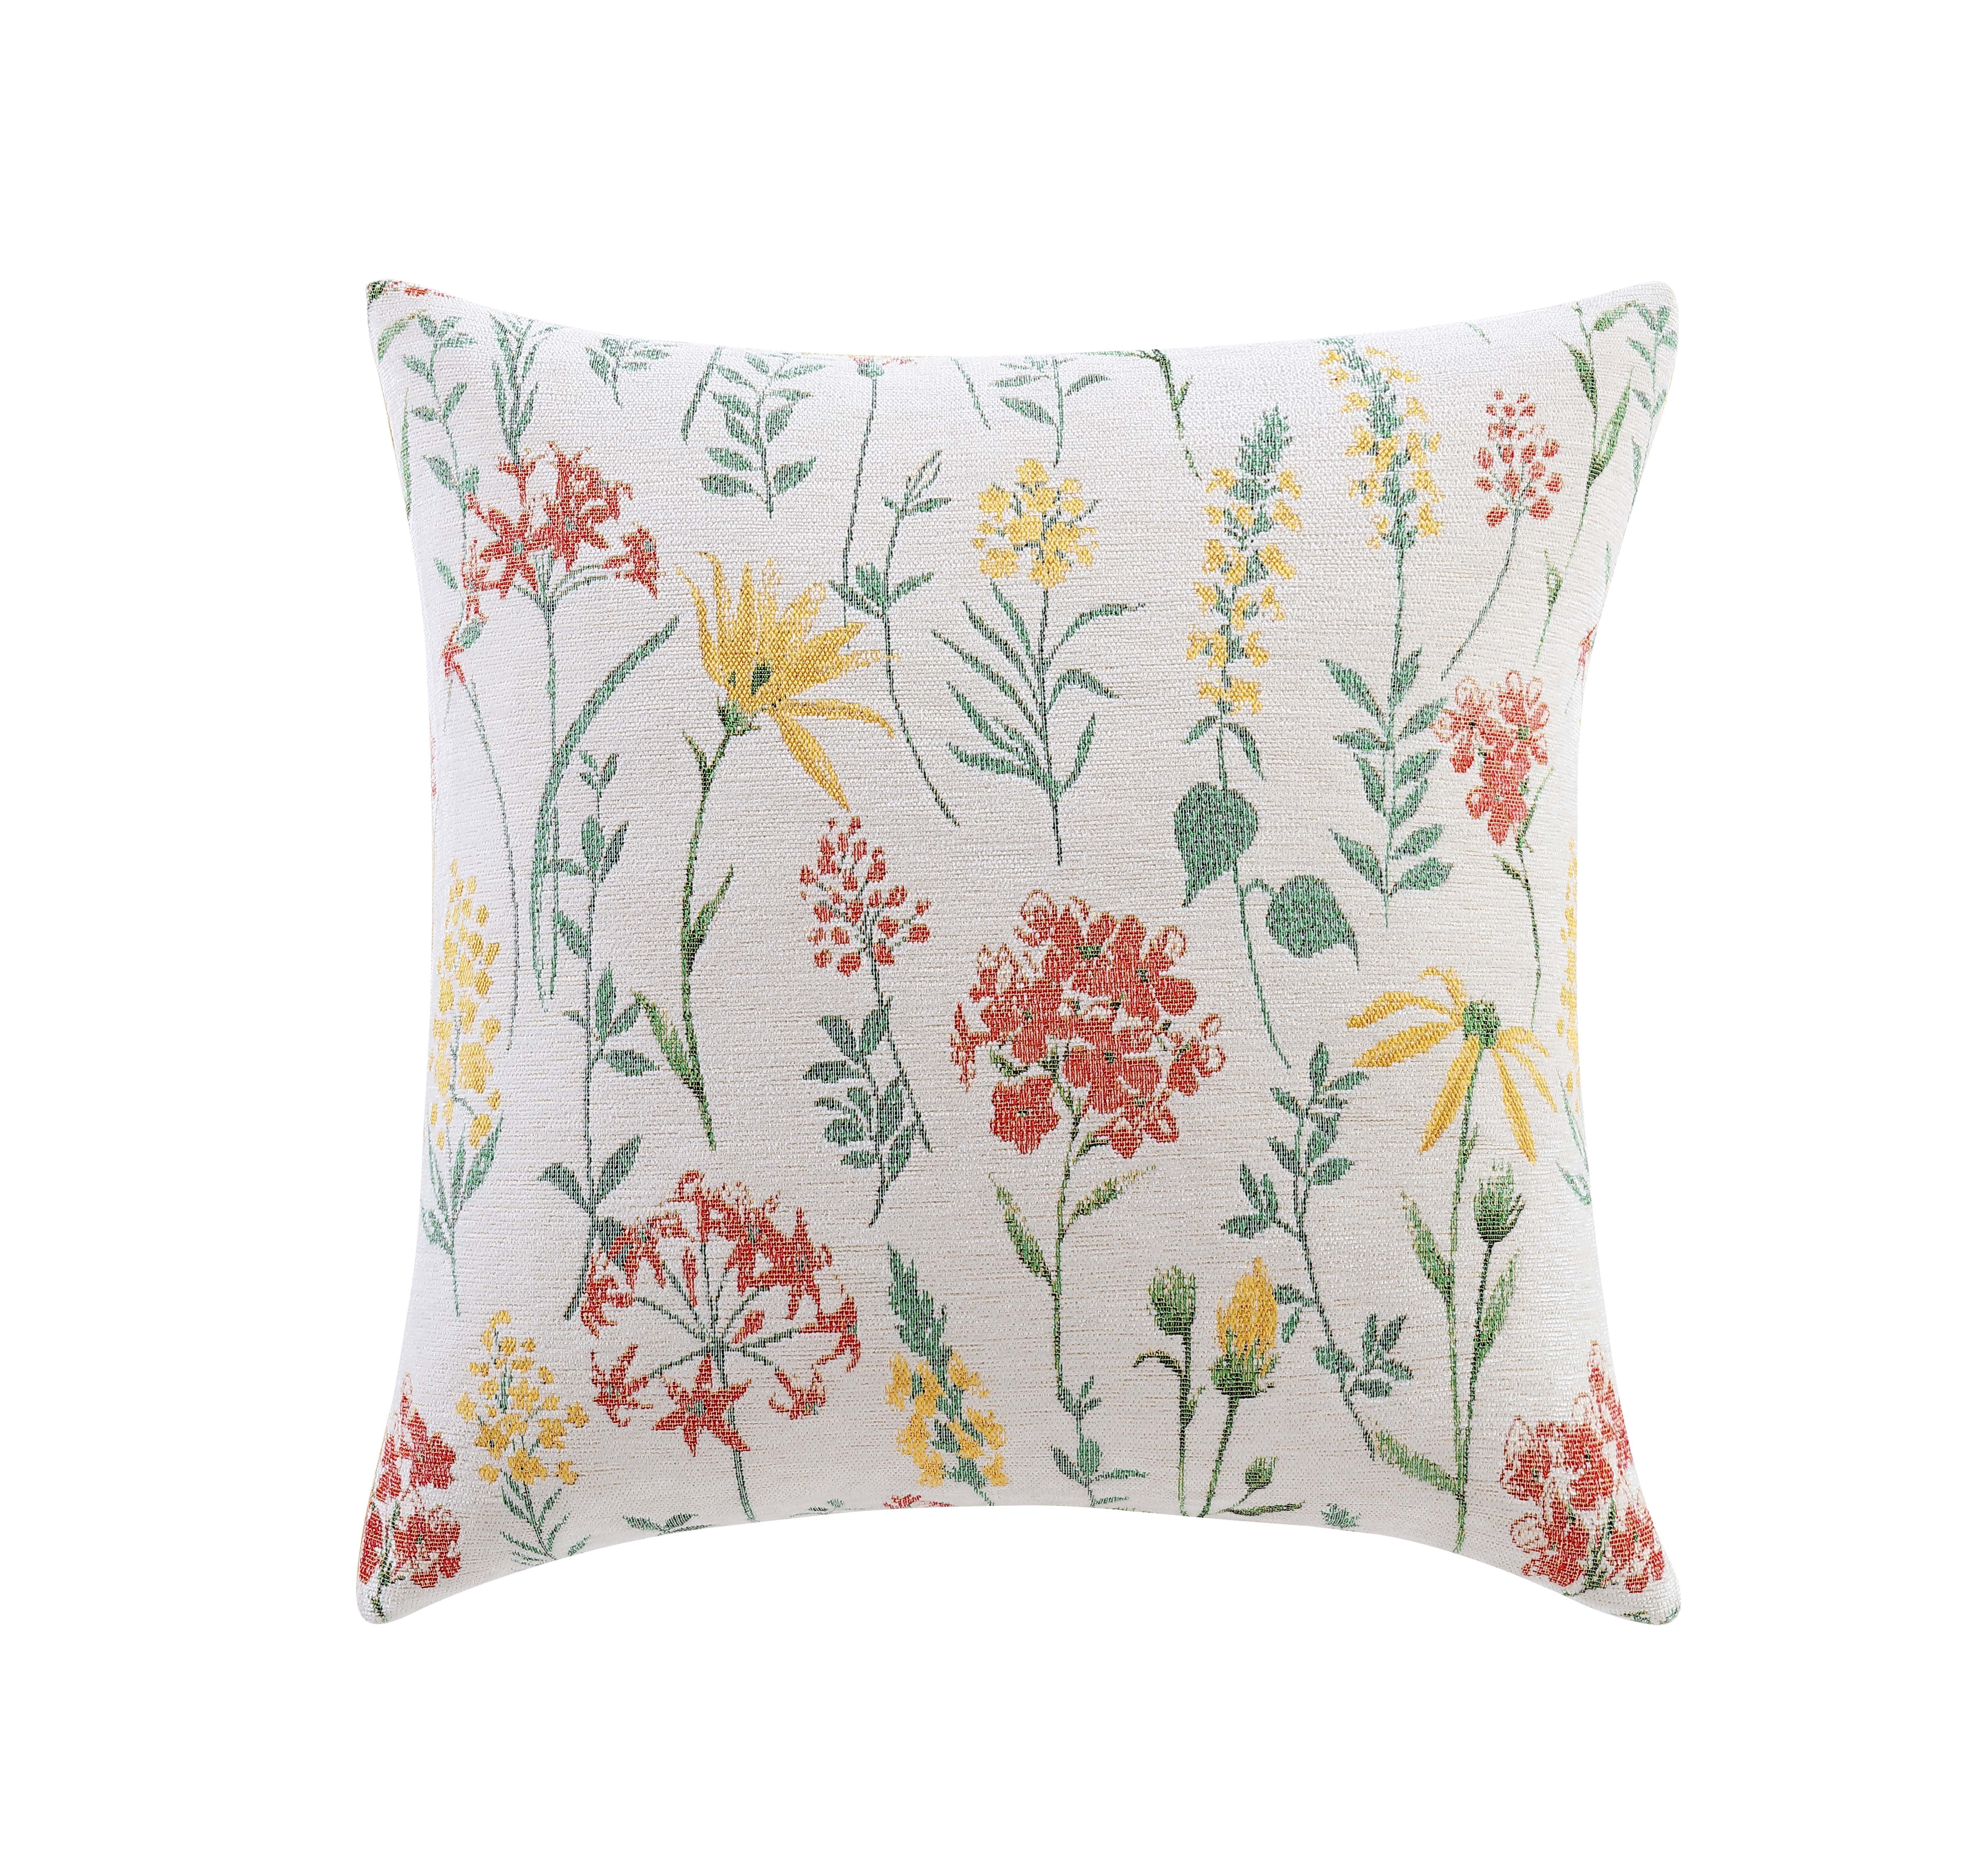 Mainstays Decorative Throw Pillow, Botanical, Square, Yellow and Coral, 20x20, 1 Pack | Walmart (US)